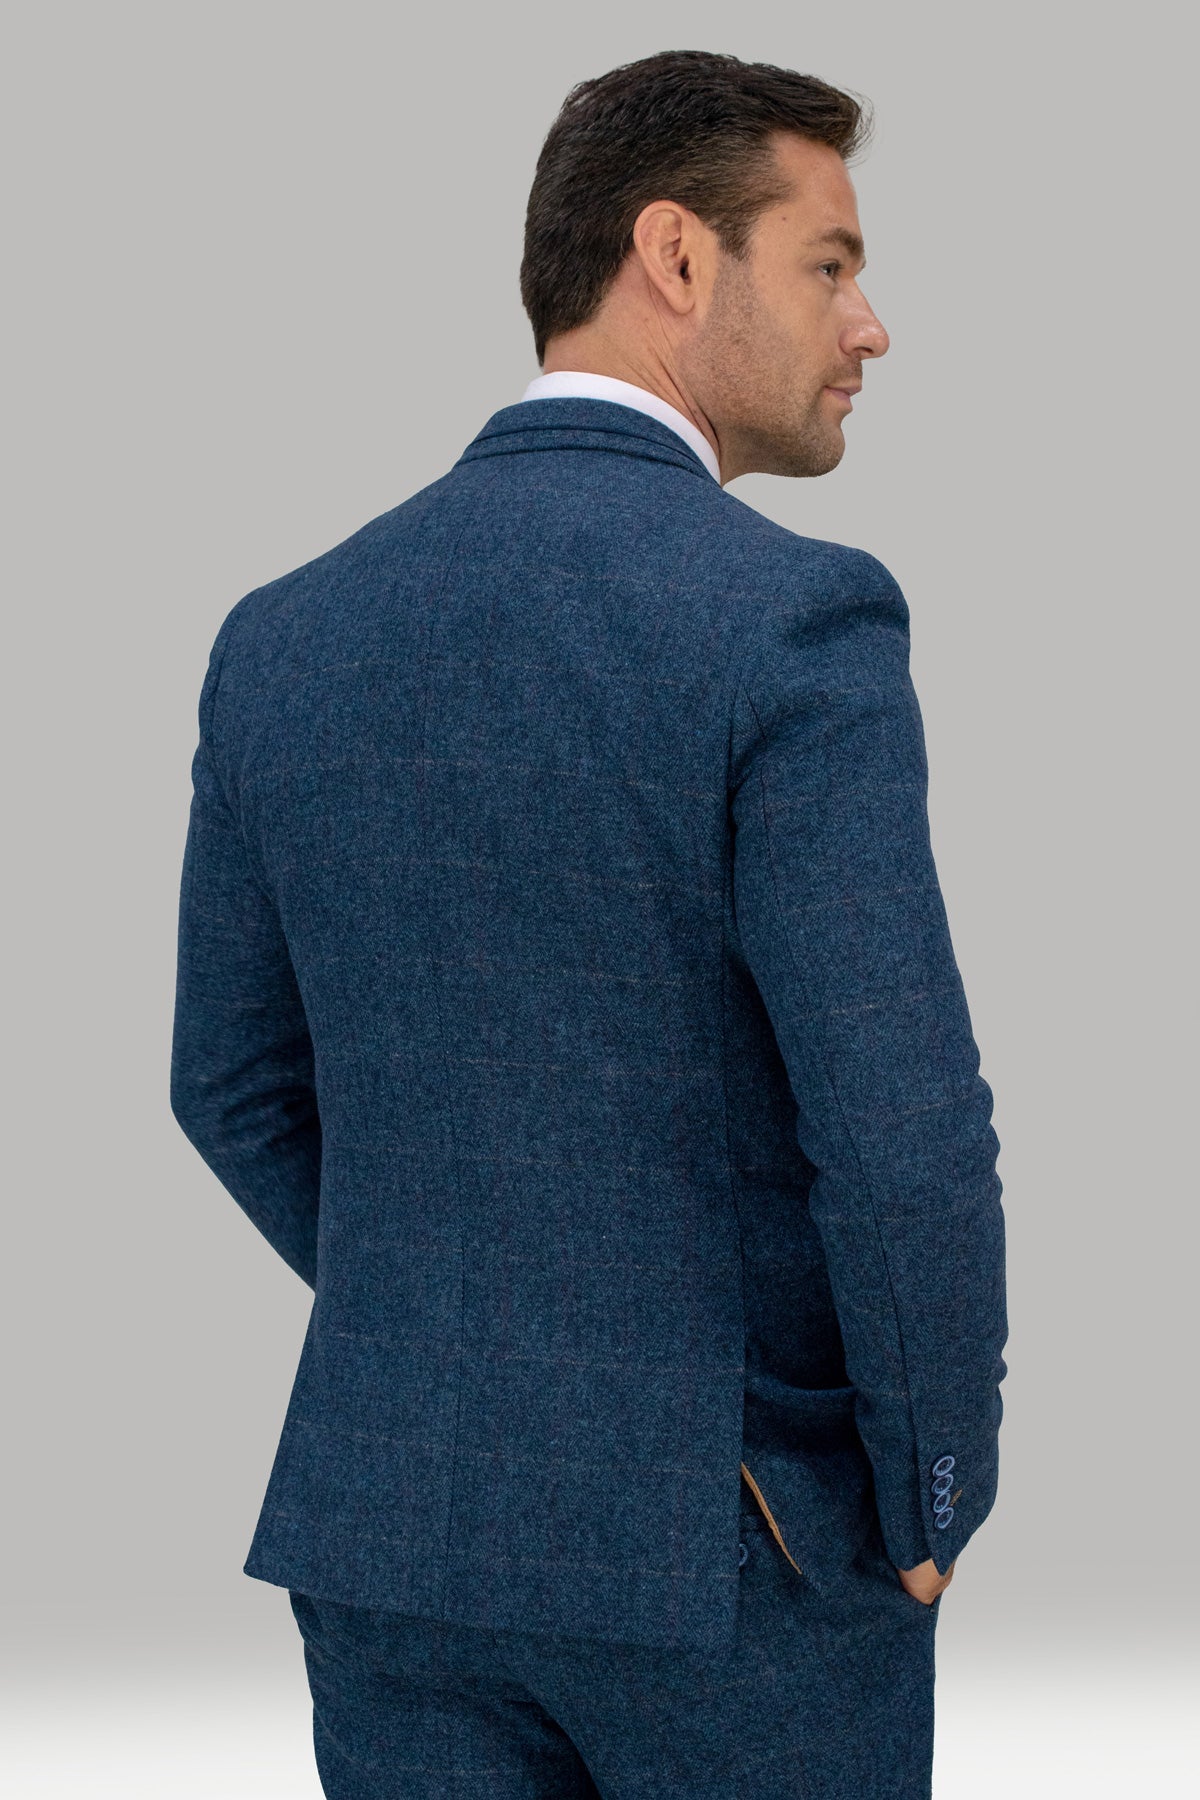 Carnegi Navy Tweed 3 Piece Wedding Suit - Suits - - Swagger & Swoon